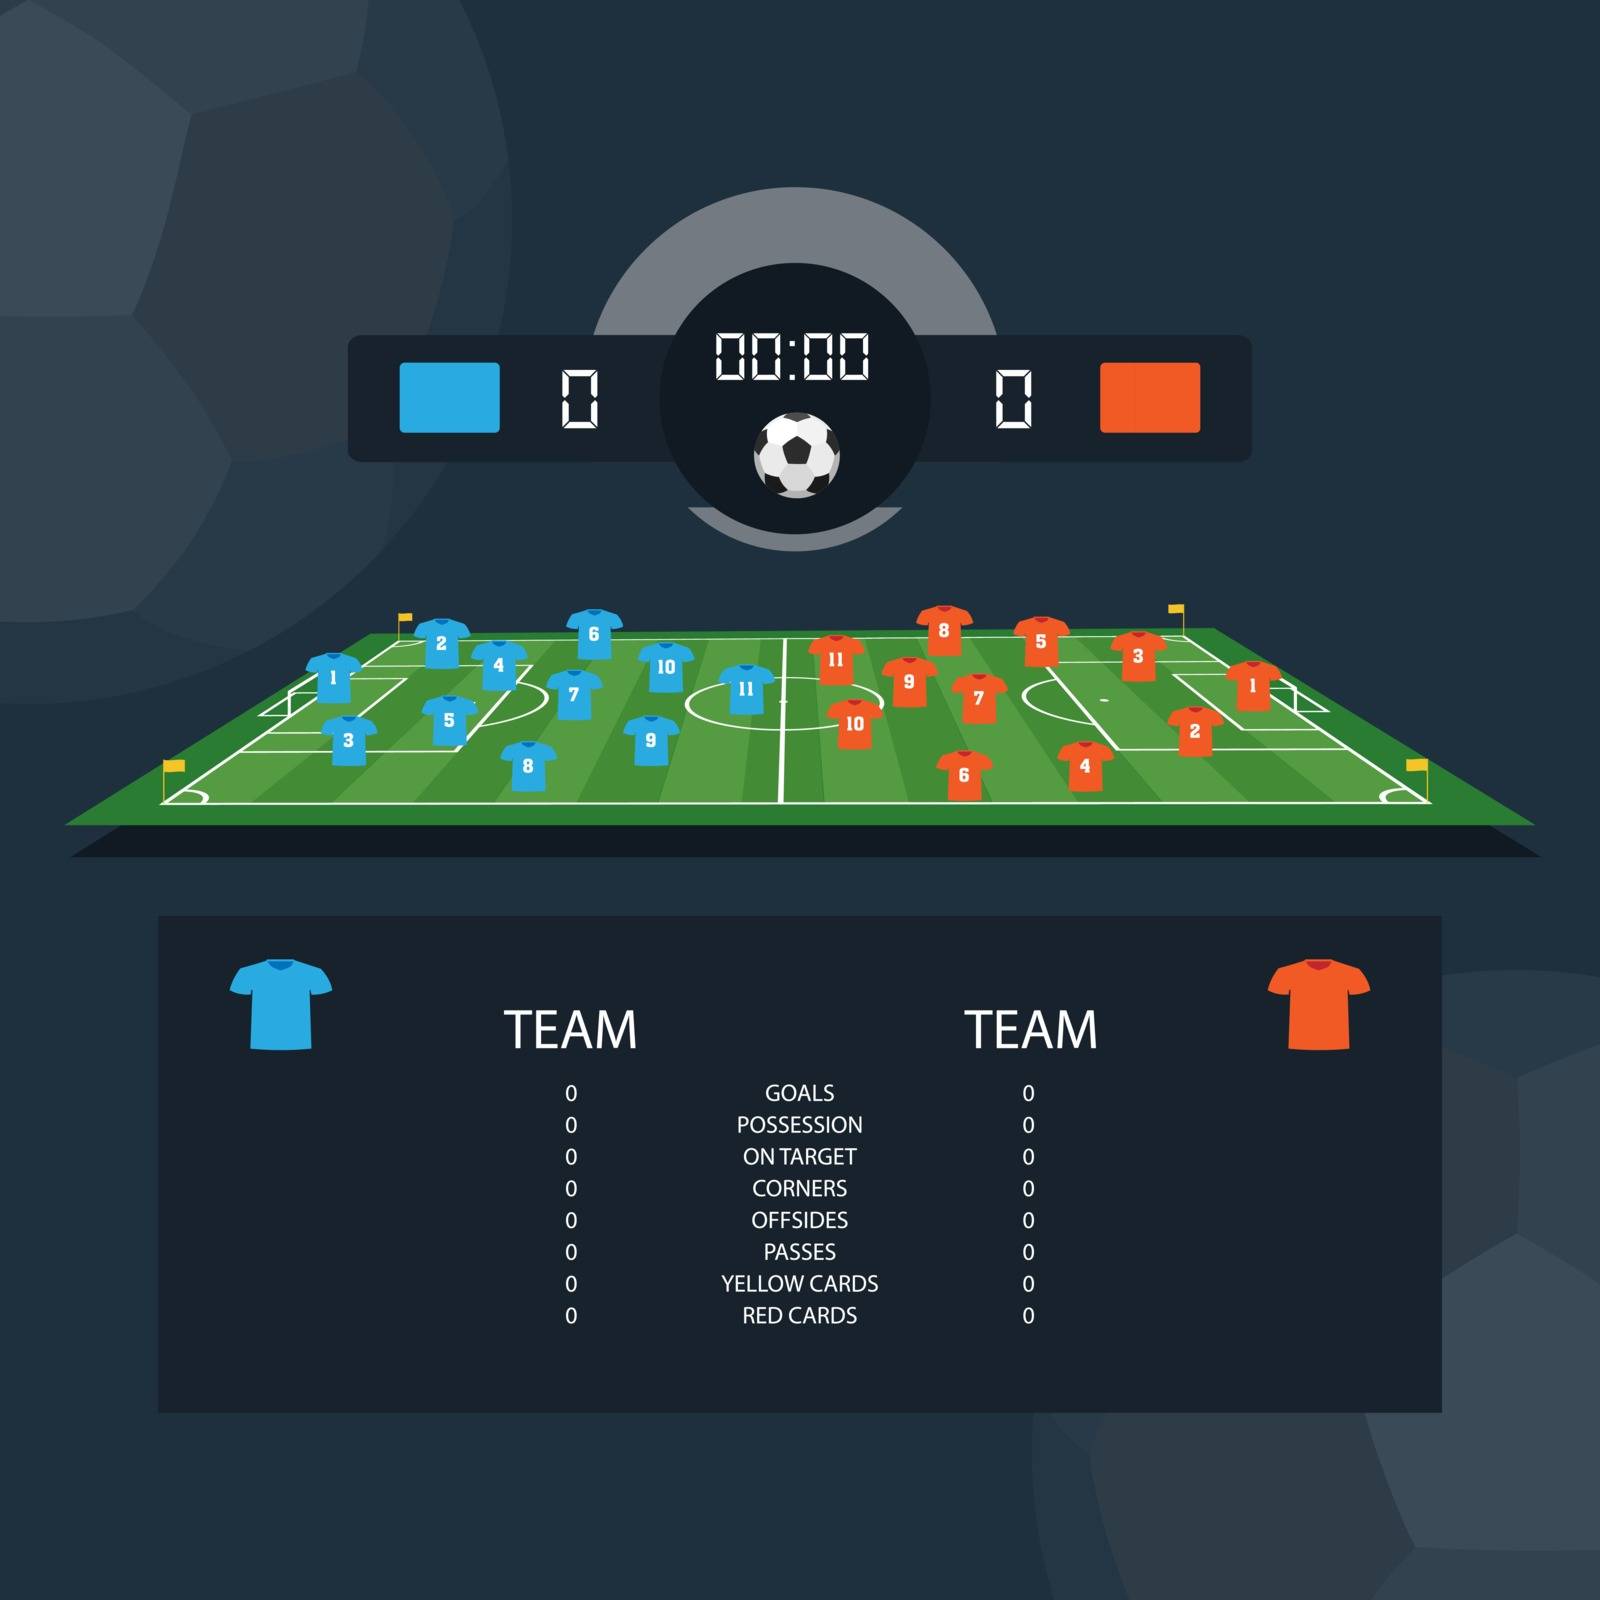 Soccer match scoreboard and statistics plan between two example teams. Flat design. Vector illustration